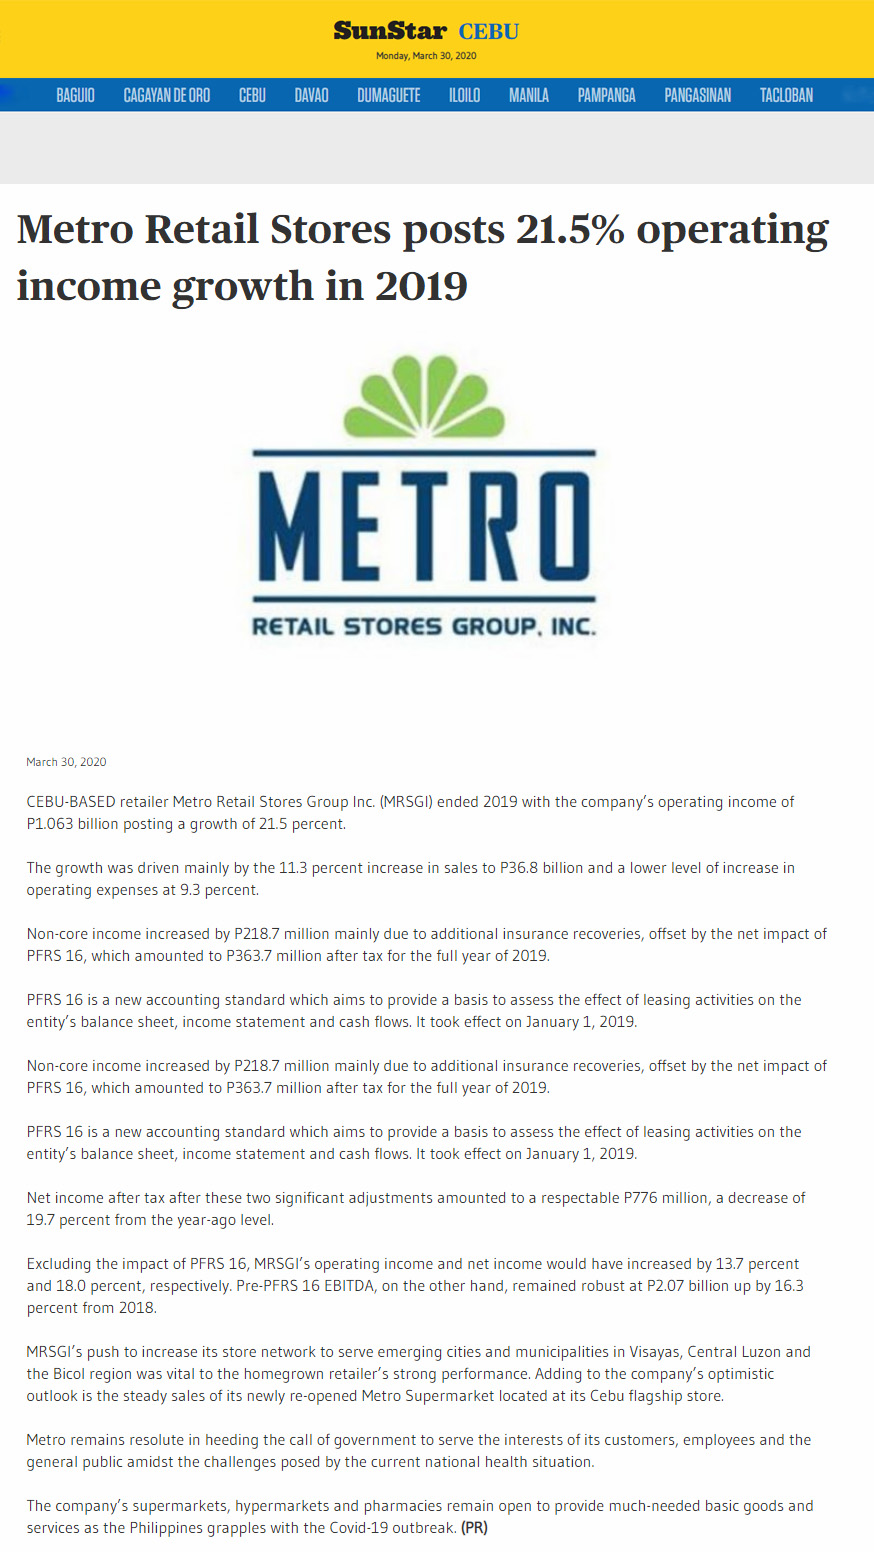 March 30 2020 Metro Retail Stores posts 21.5 operating income growth in 2019 Sun Star Network www.sunstar.com.ph